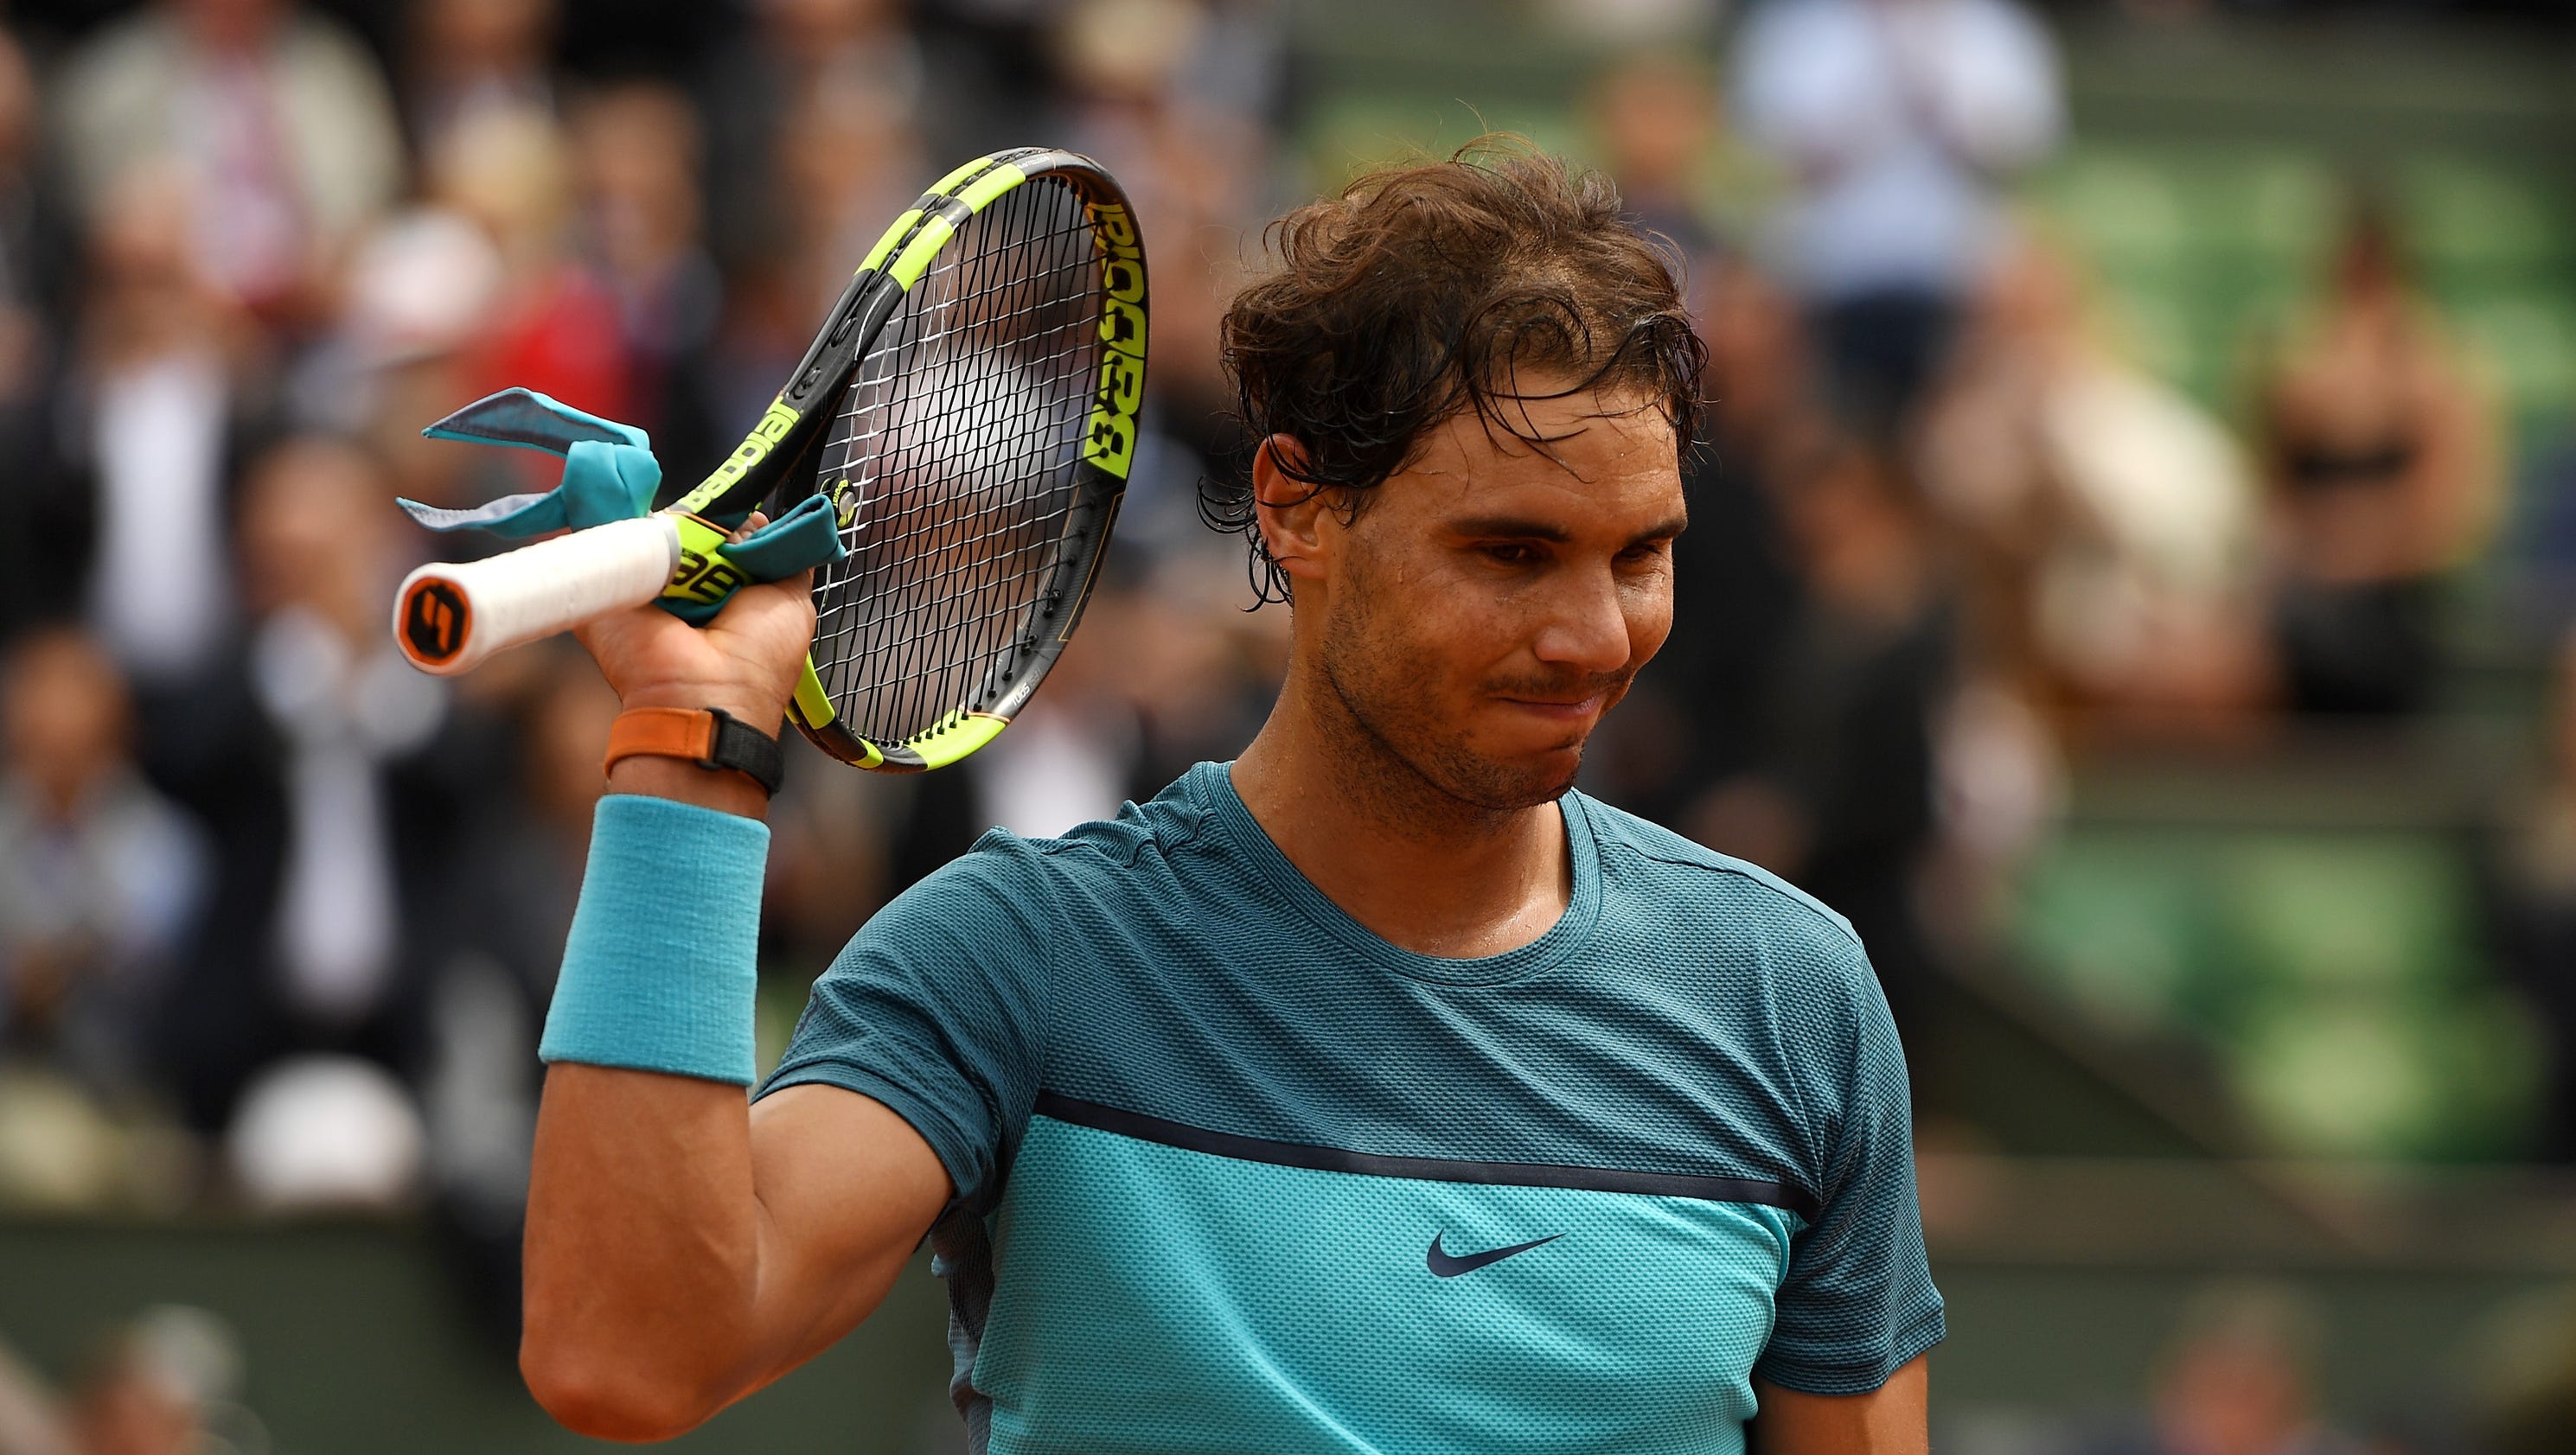 Rafael Nadal wins 200th Grand Slam match at French Open